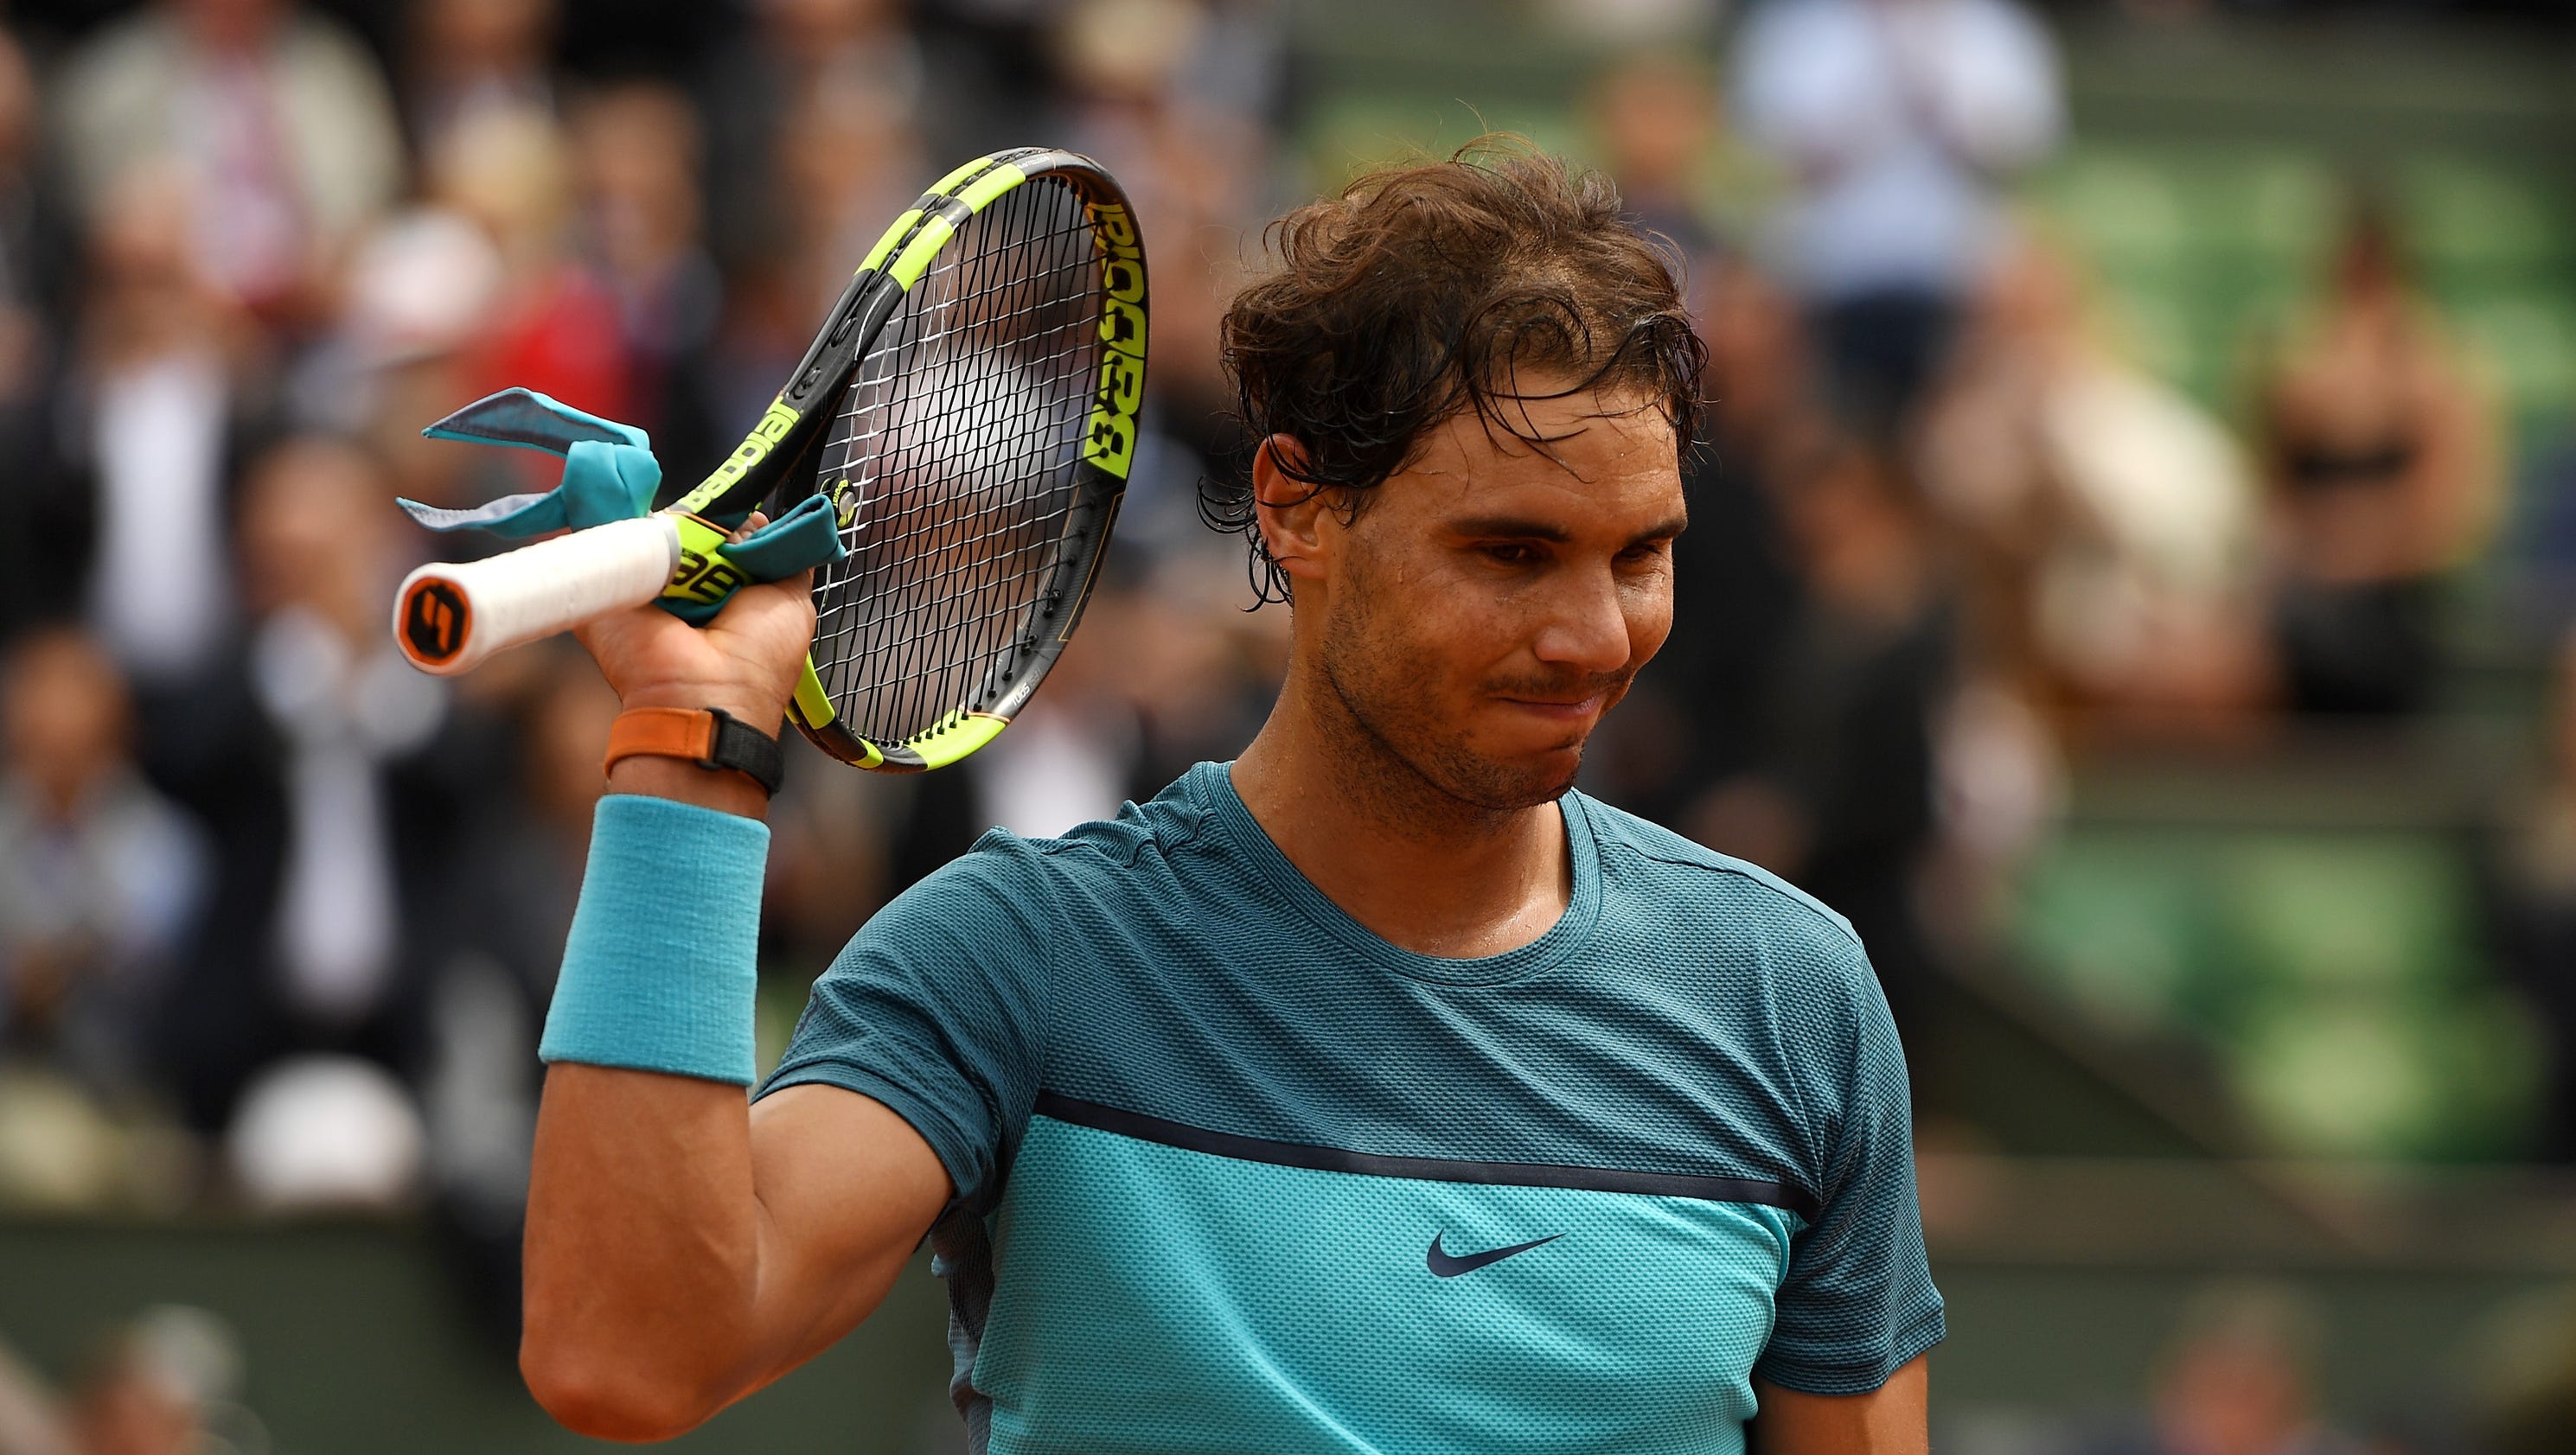 Rafael Nadal wins 200th Grand Slam match at French Open